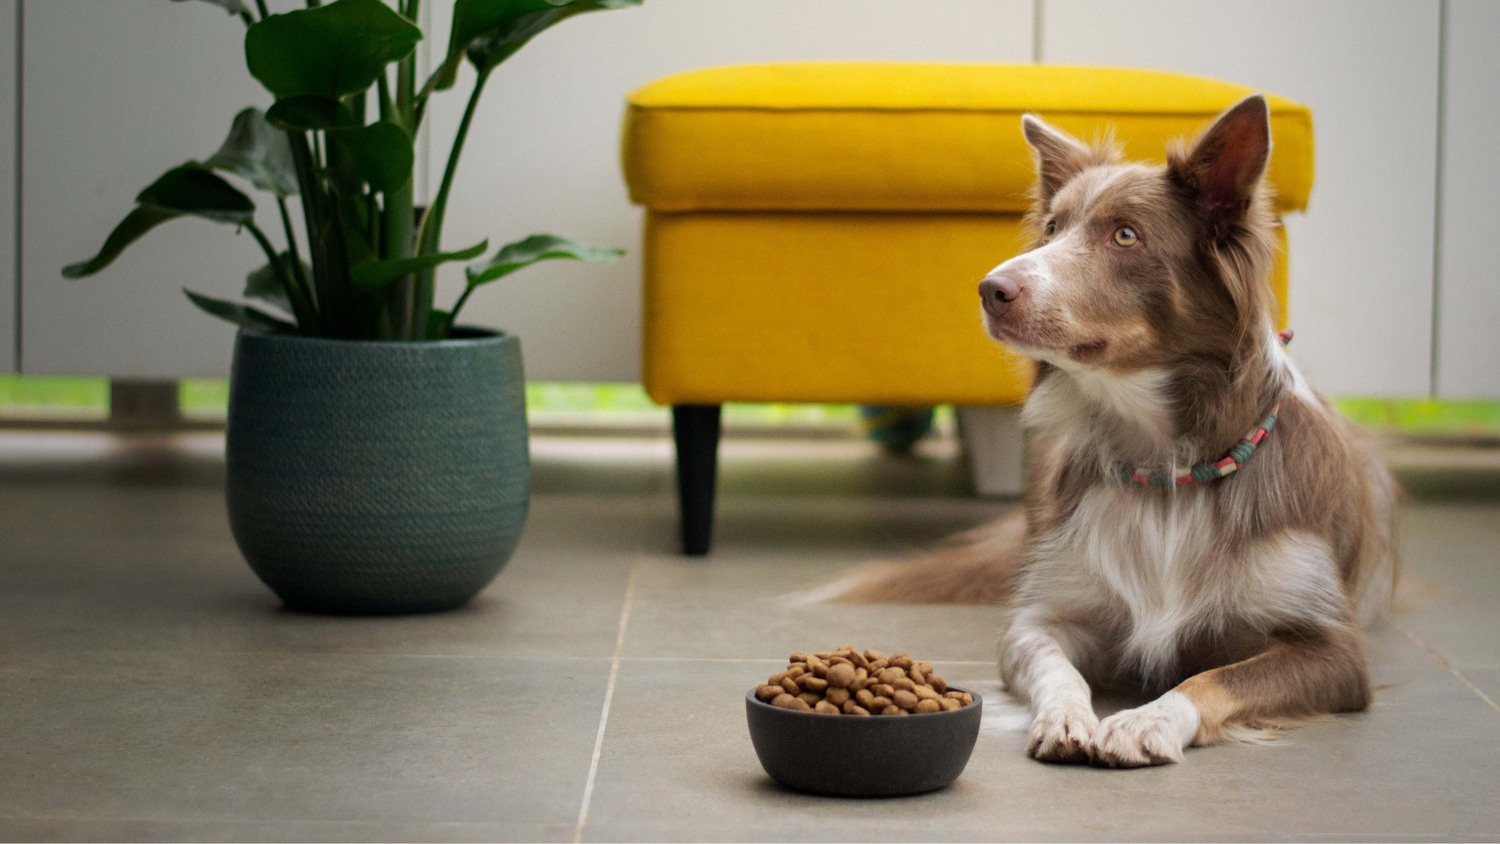 What are you feeding your dog? Ingredients to look for in your dog's kibble. 